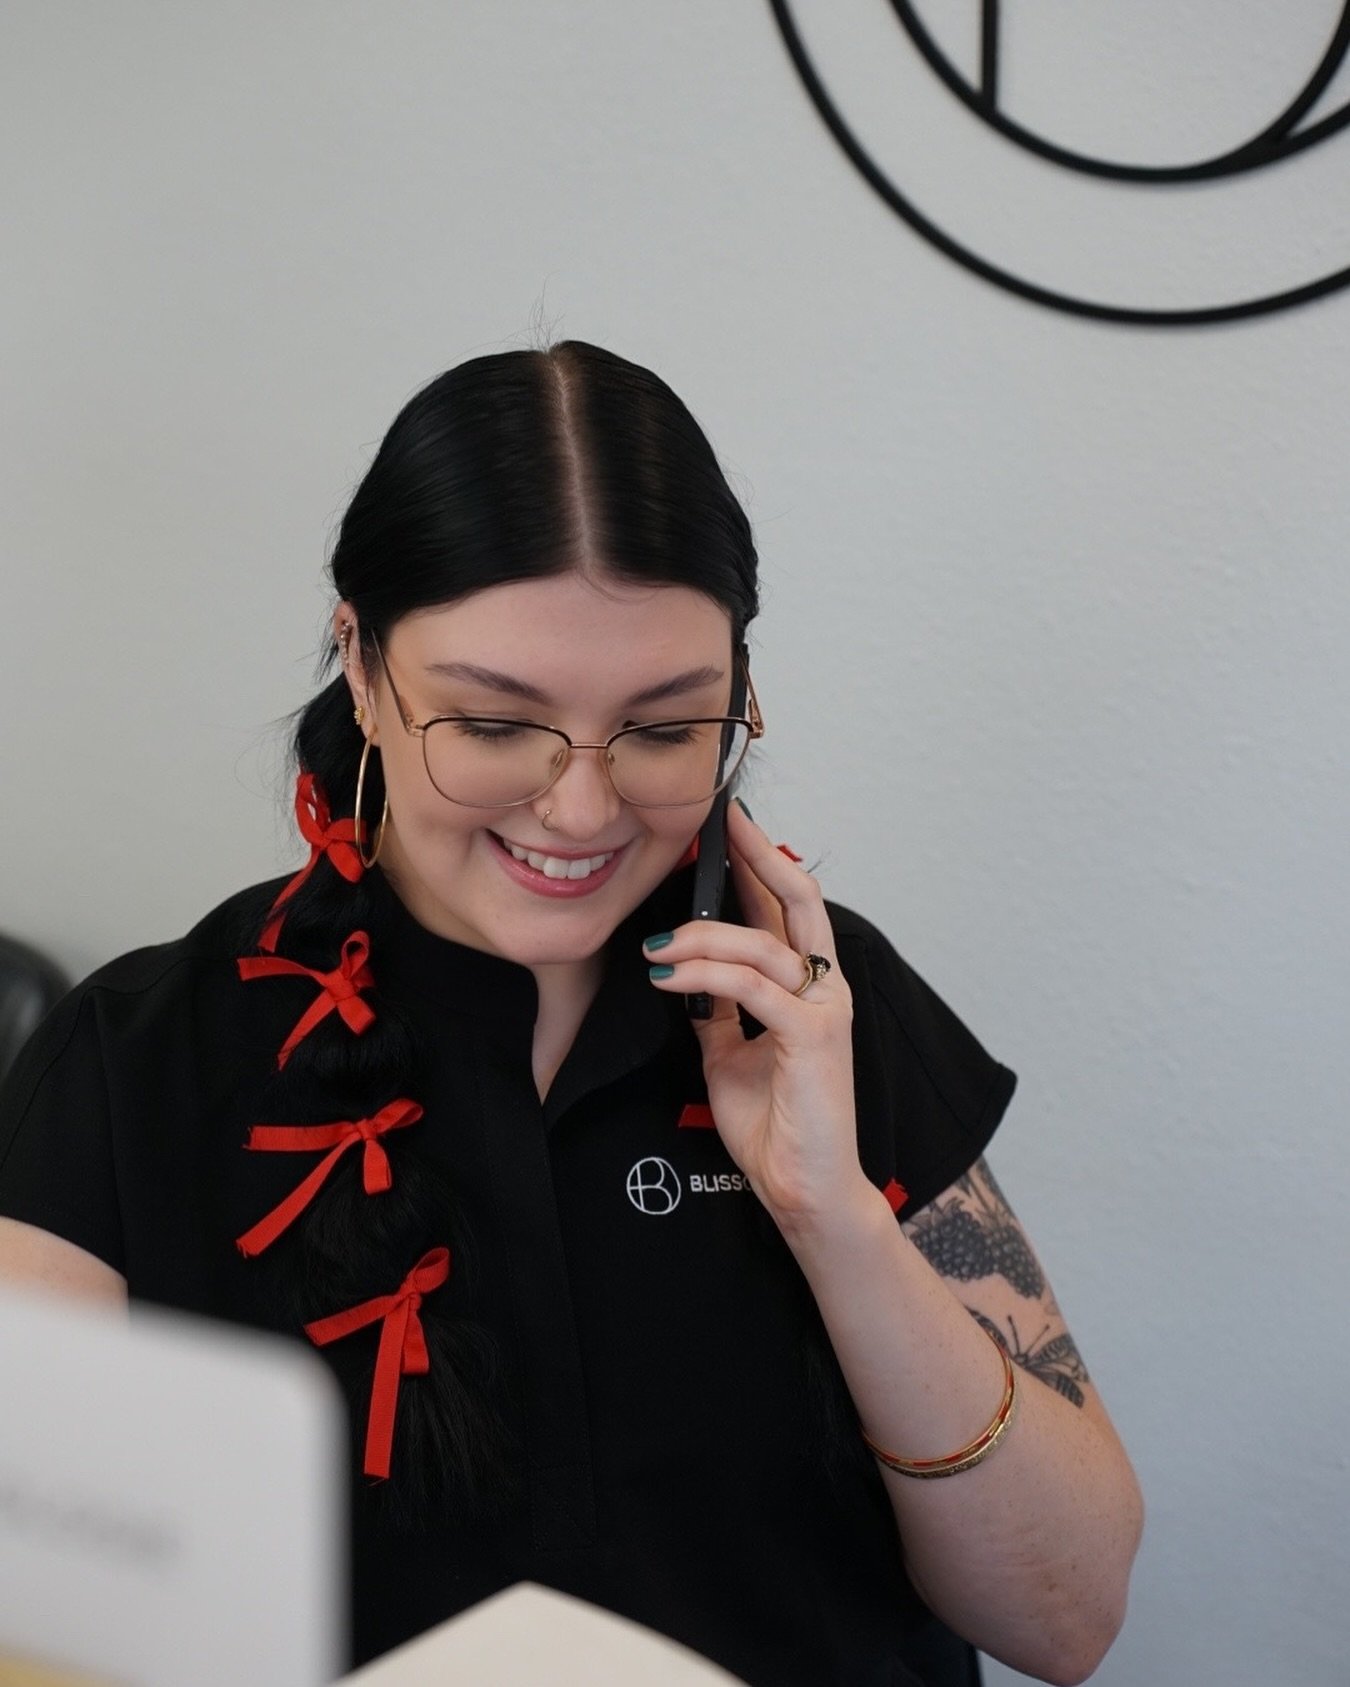 Meet our new Salon Coordinator Hannah! A music enthusiast and tattoo lover. When not at work, Hannah is soaking up the wonders of life, one song and family moment at a time &hearts;️ We are so thrilled to welcome her into our Blissologie fam!